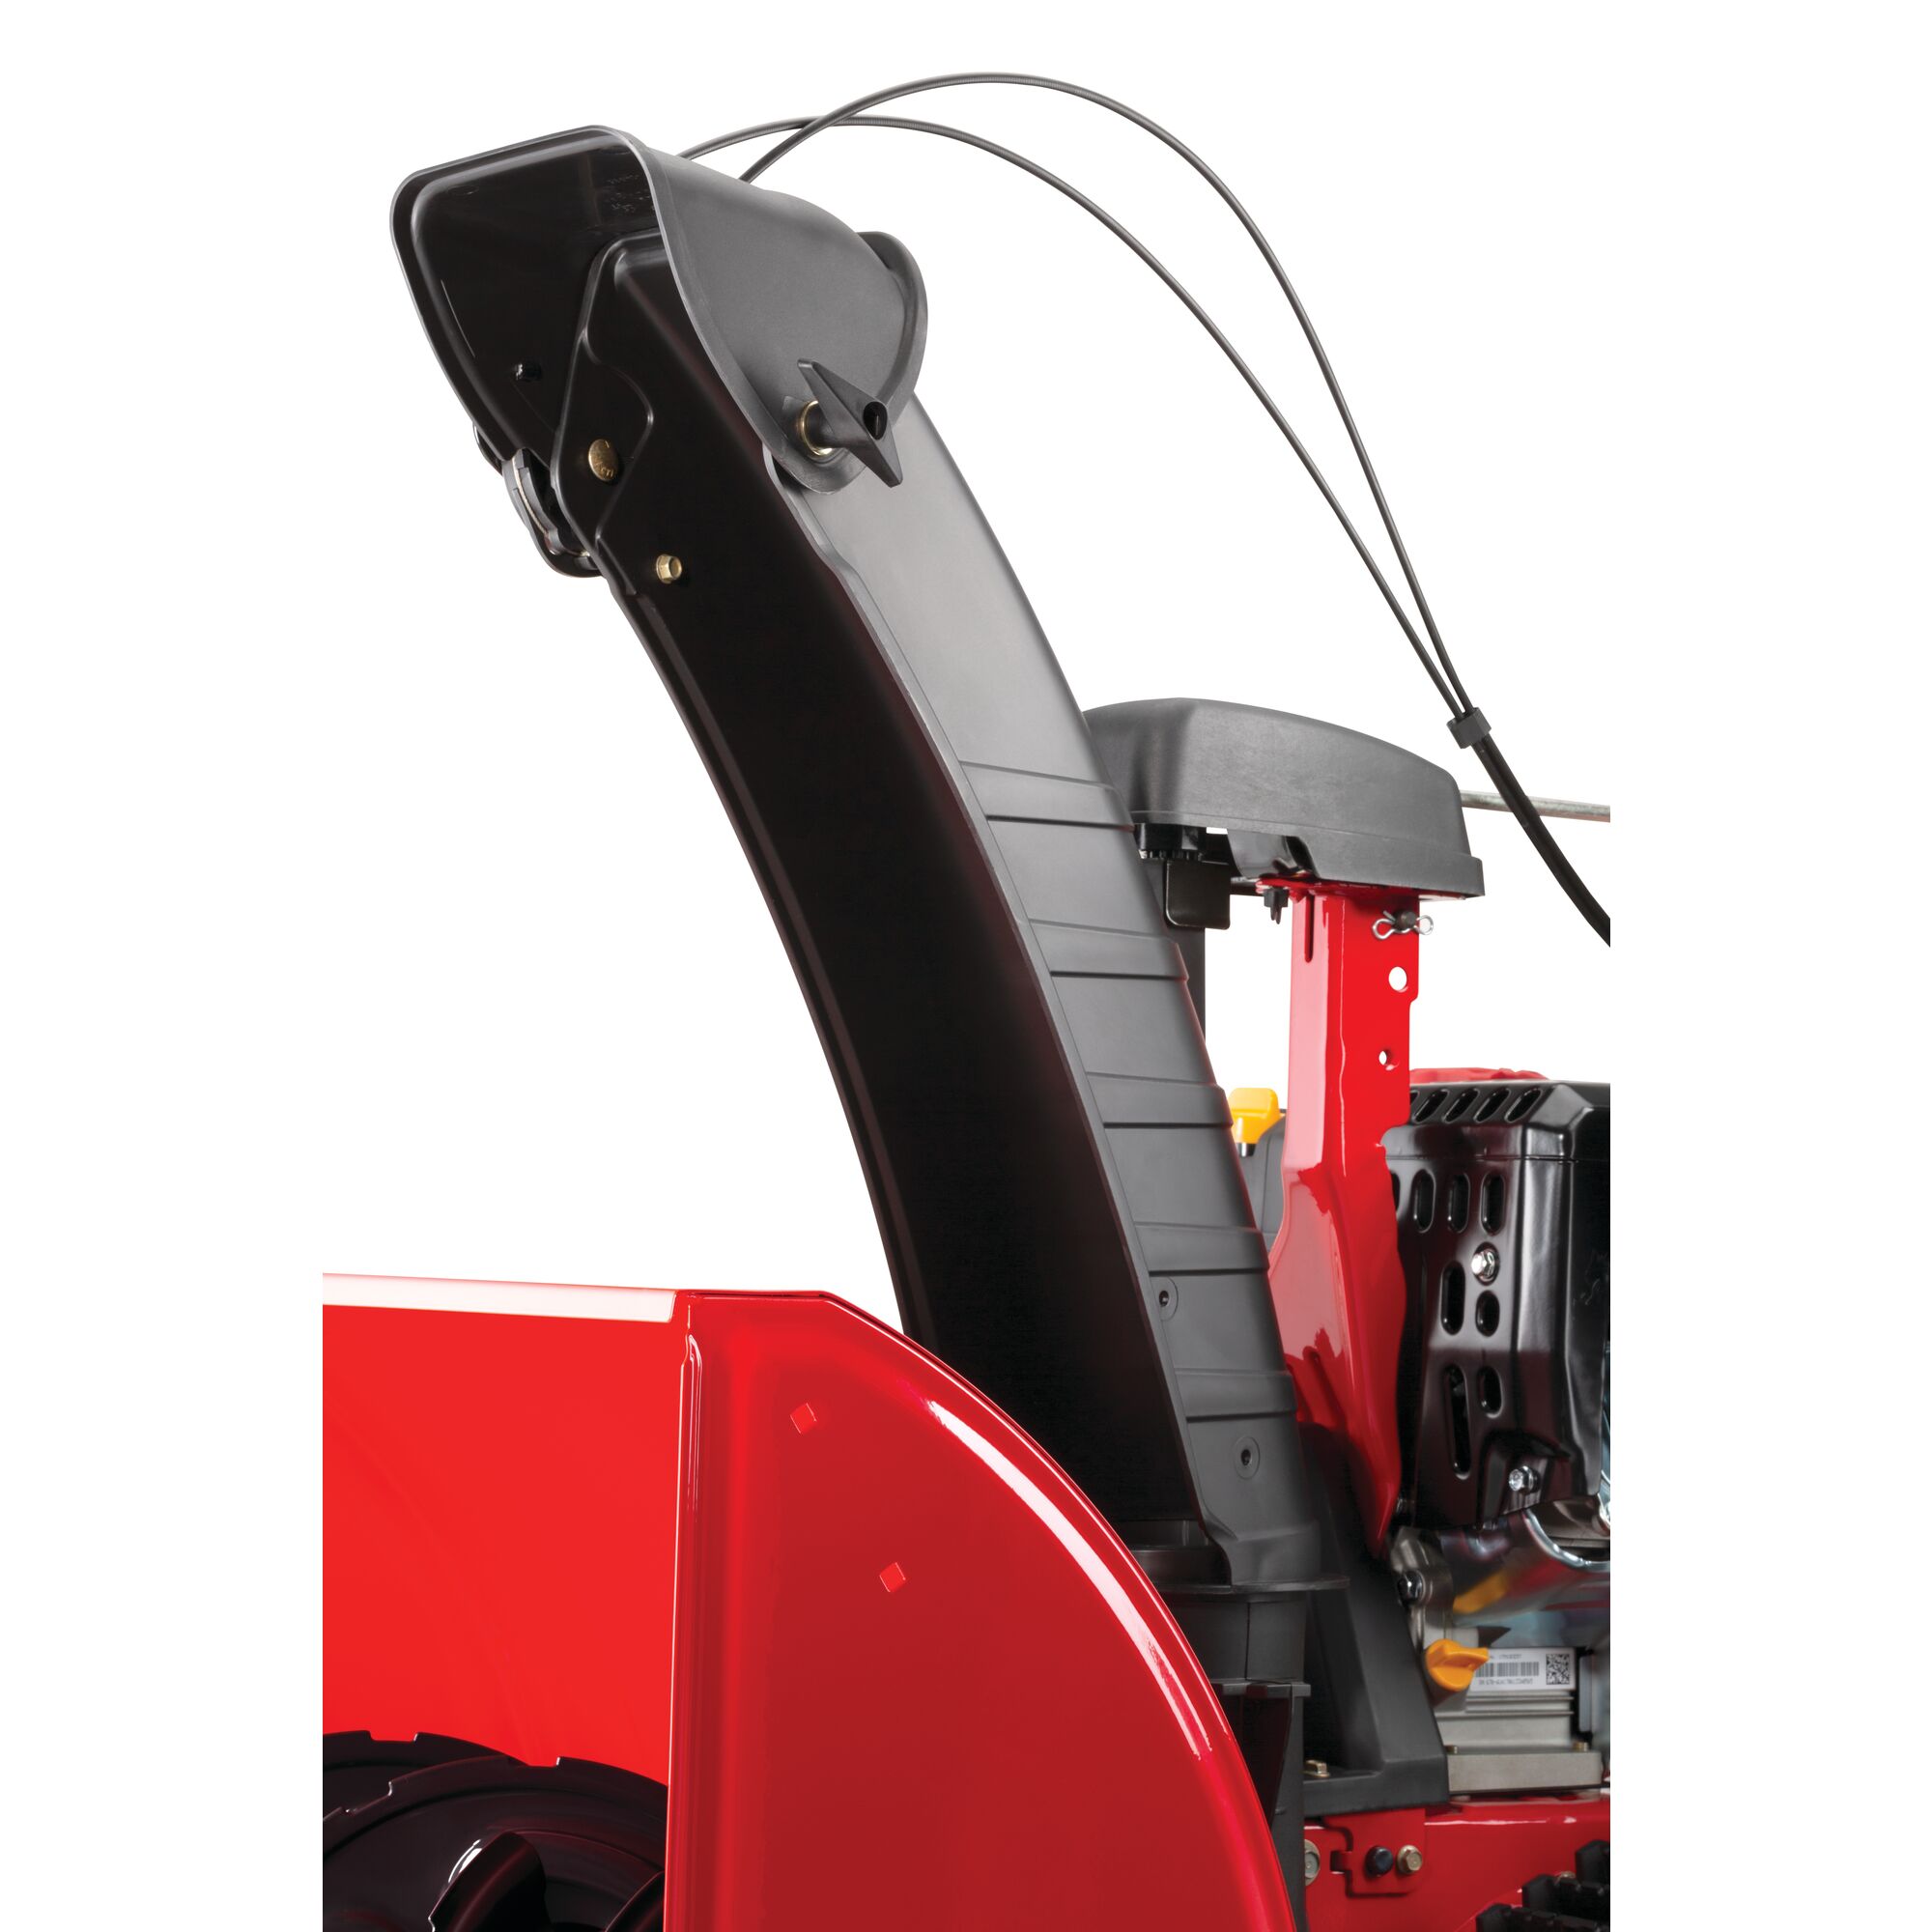 Electric chute control feature in 26 inch 208 CC electric start track drive snow blower.